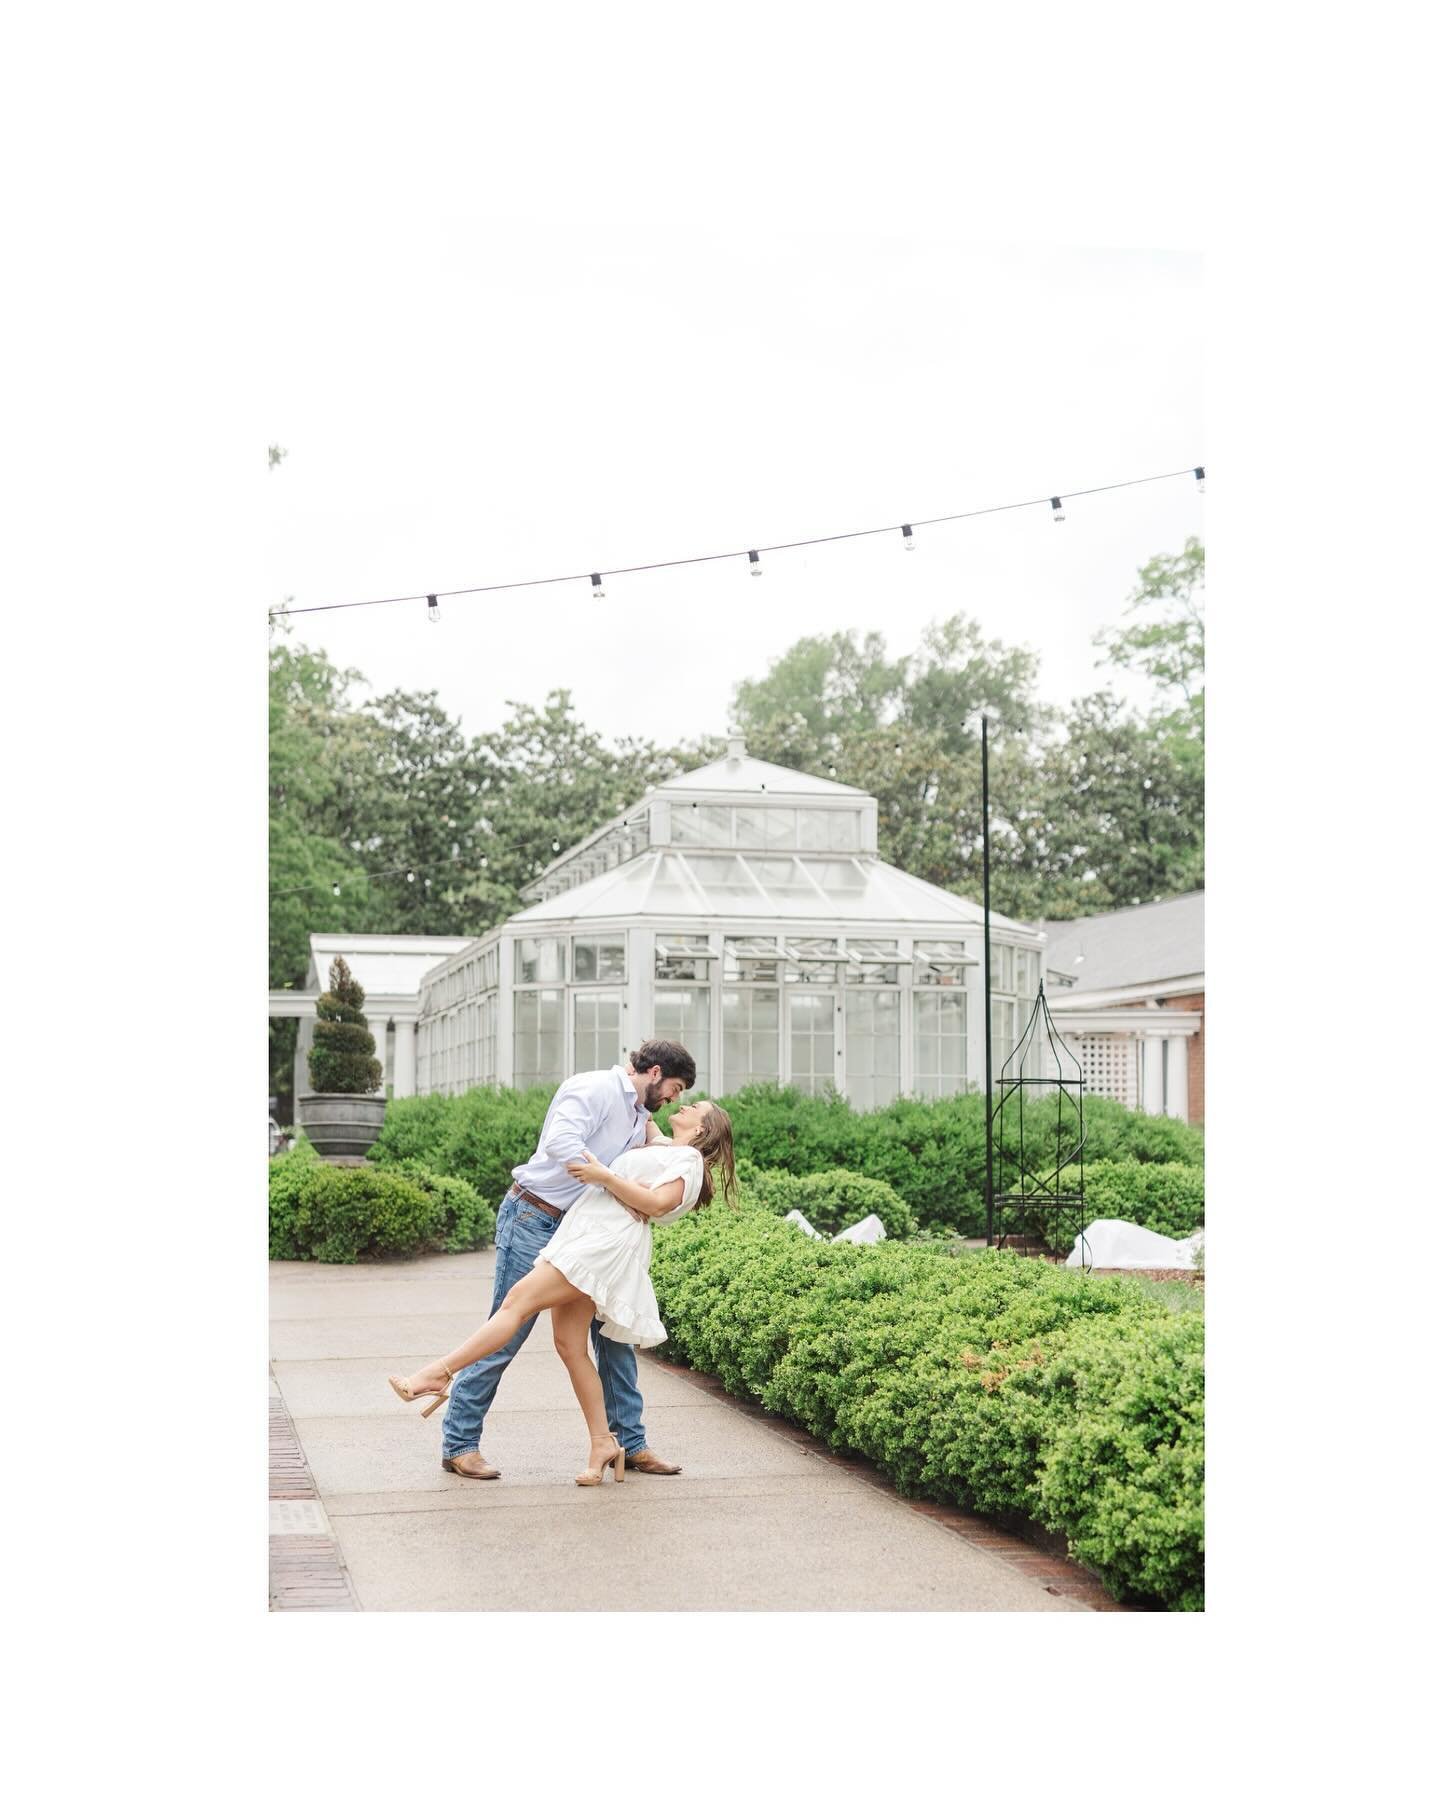 Your engagement shoot is a great time to practice if you plan to do a dip on the way down the aisle. 🤍 

#fineartweddings #wildflowers901 #memphisweddingphotographer